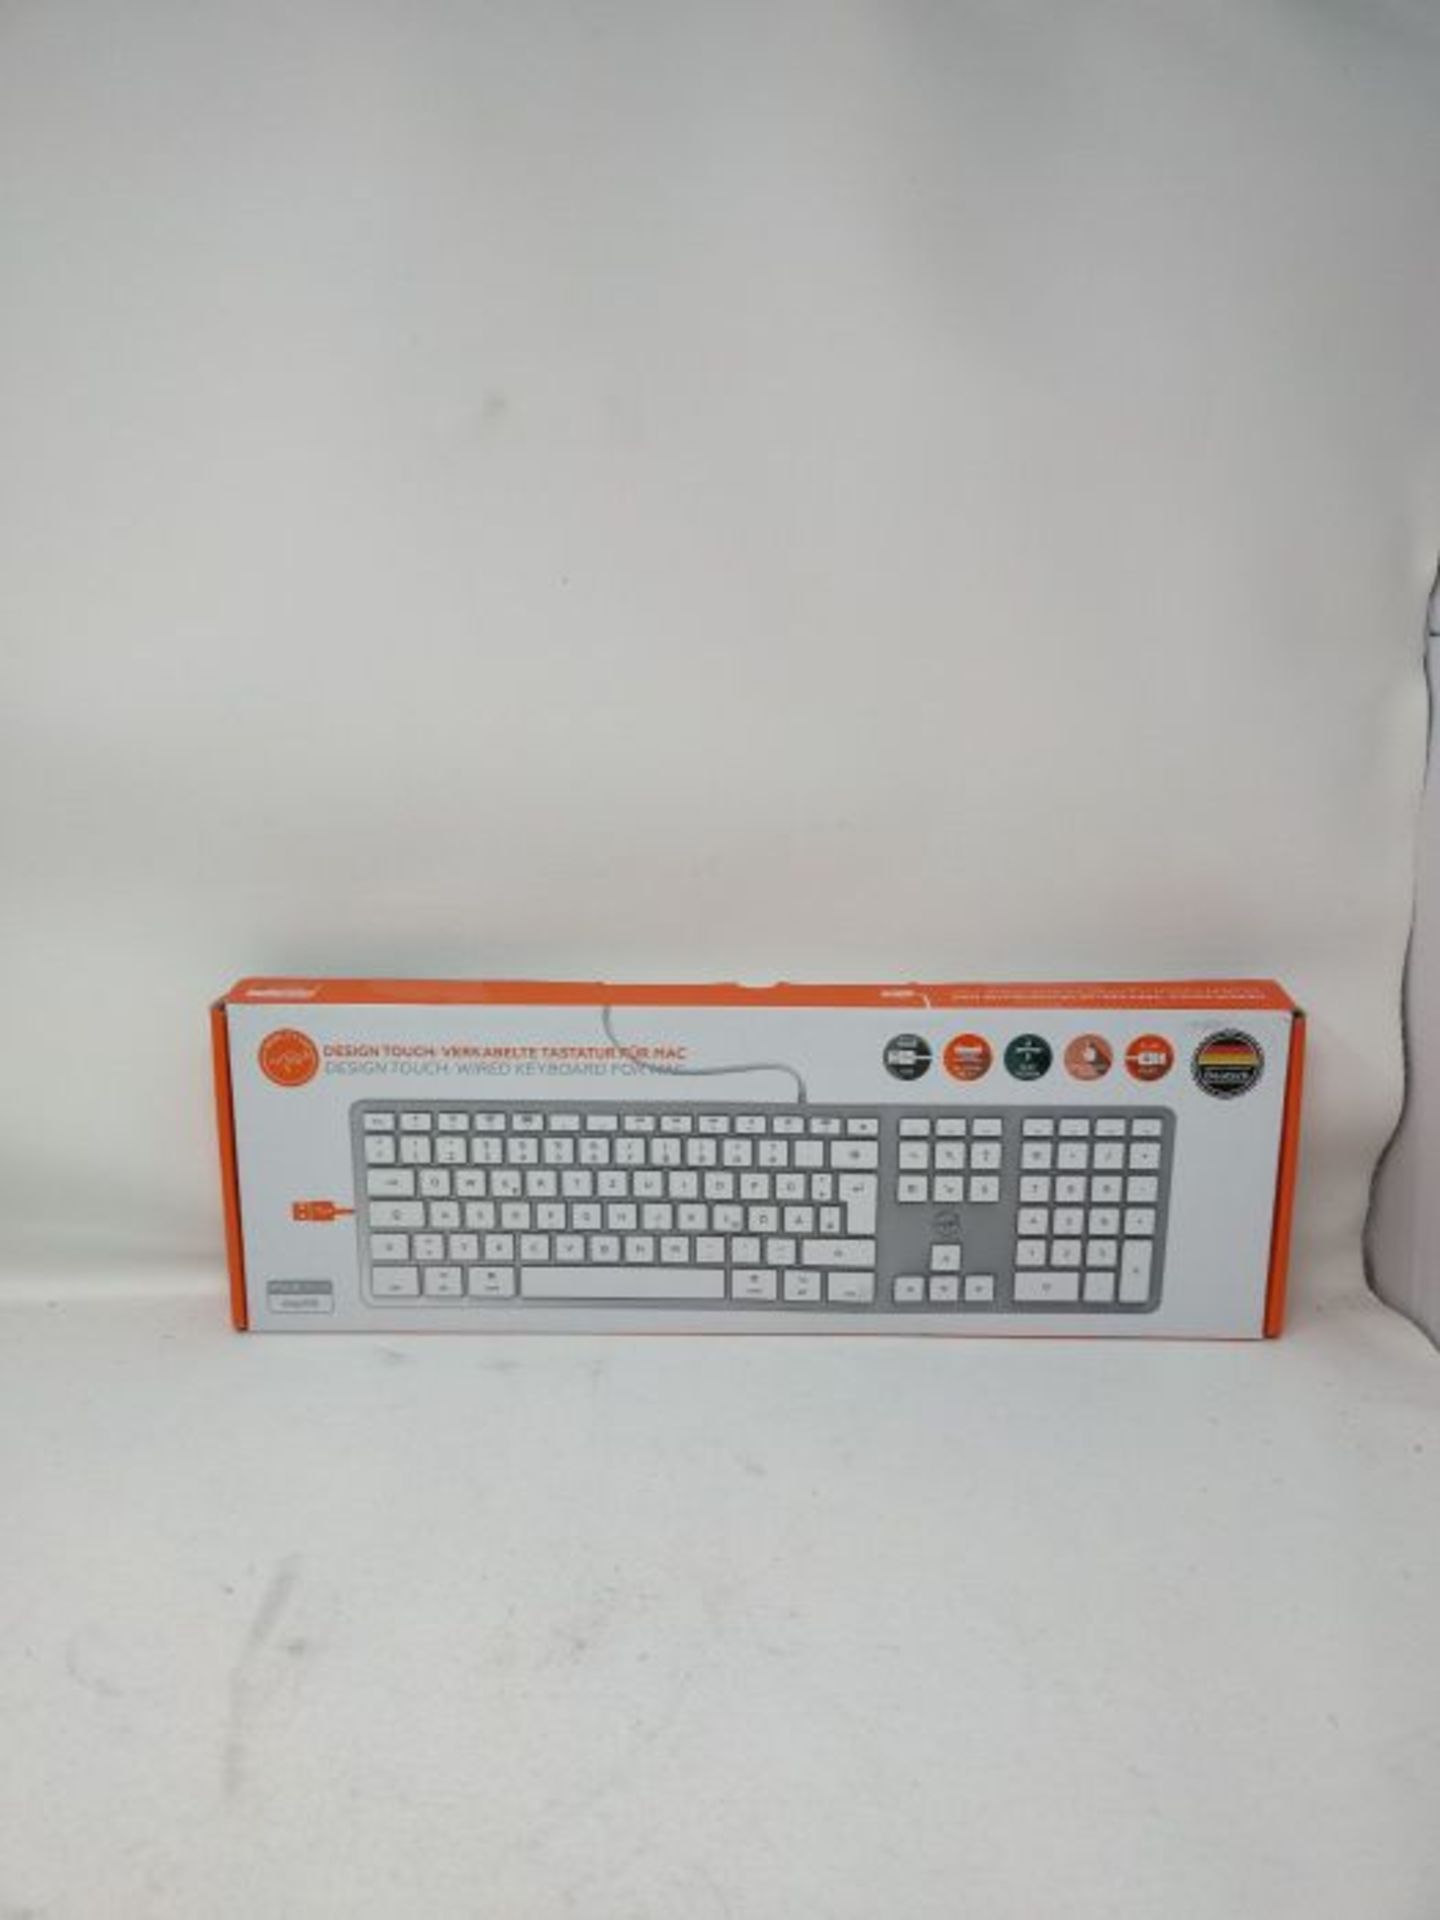 Mobility Lab ML311142 Wired Keyboard QWERTZ German Layout ideal for Mac - White/Silver - Image 2 of 3